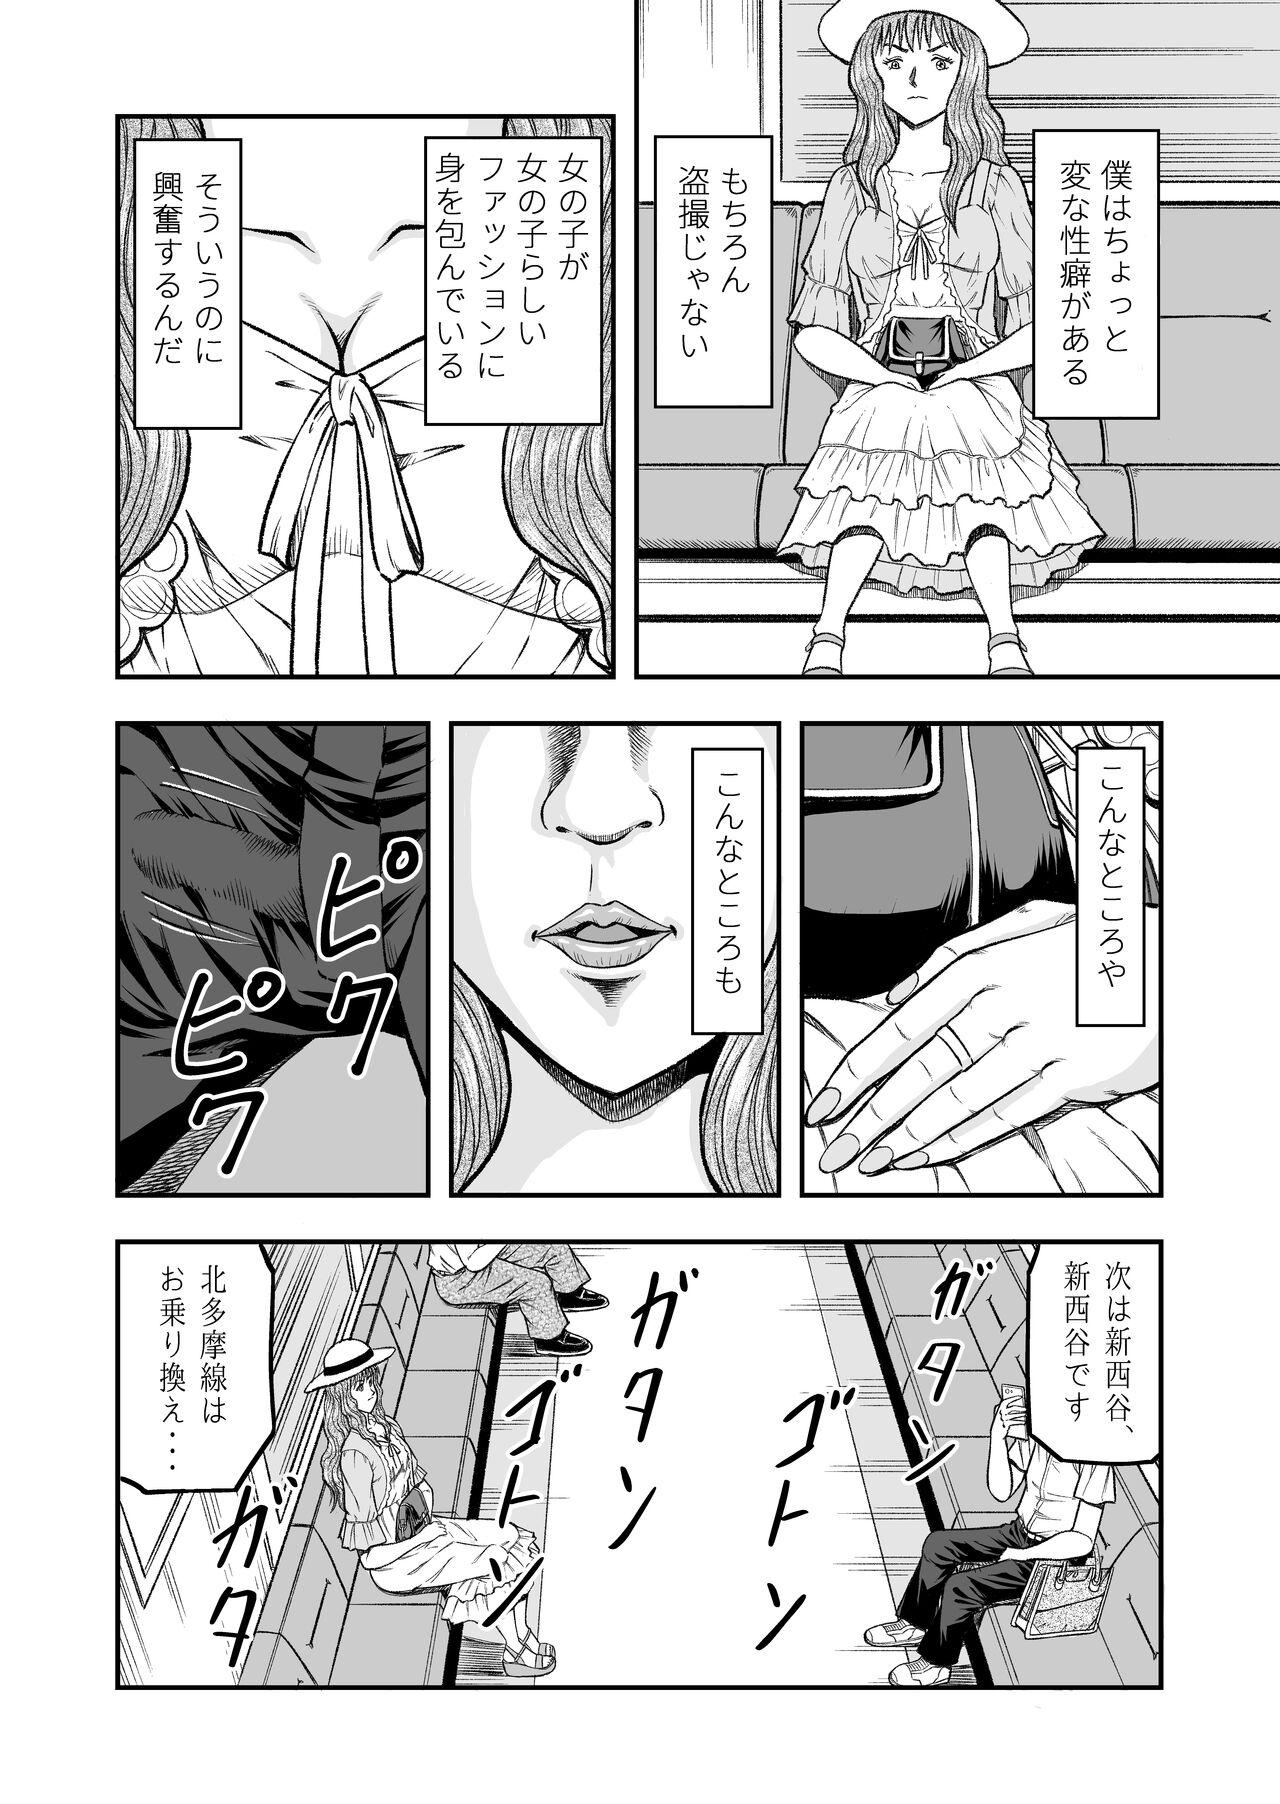 Jacking Off OwnWillボクがアタシになったとき 総集編 - Original Asses - Page 4